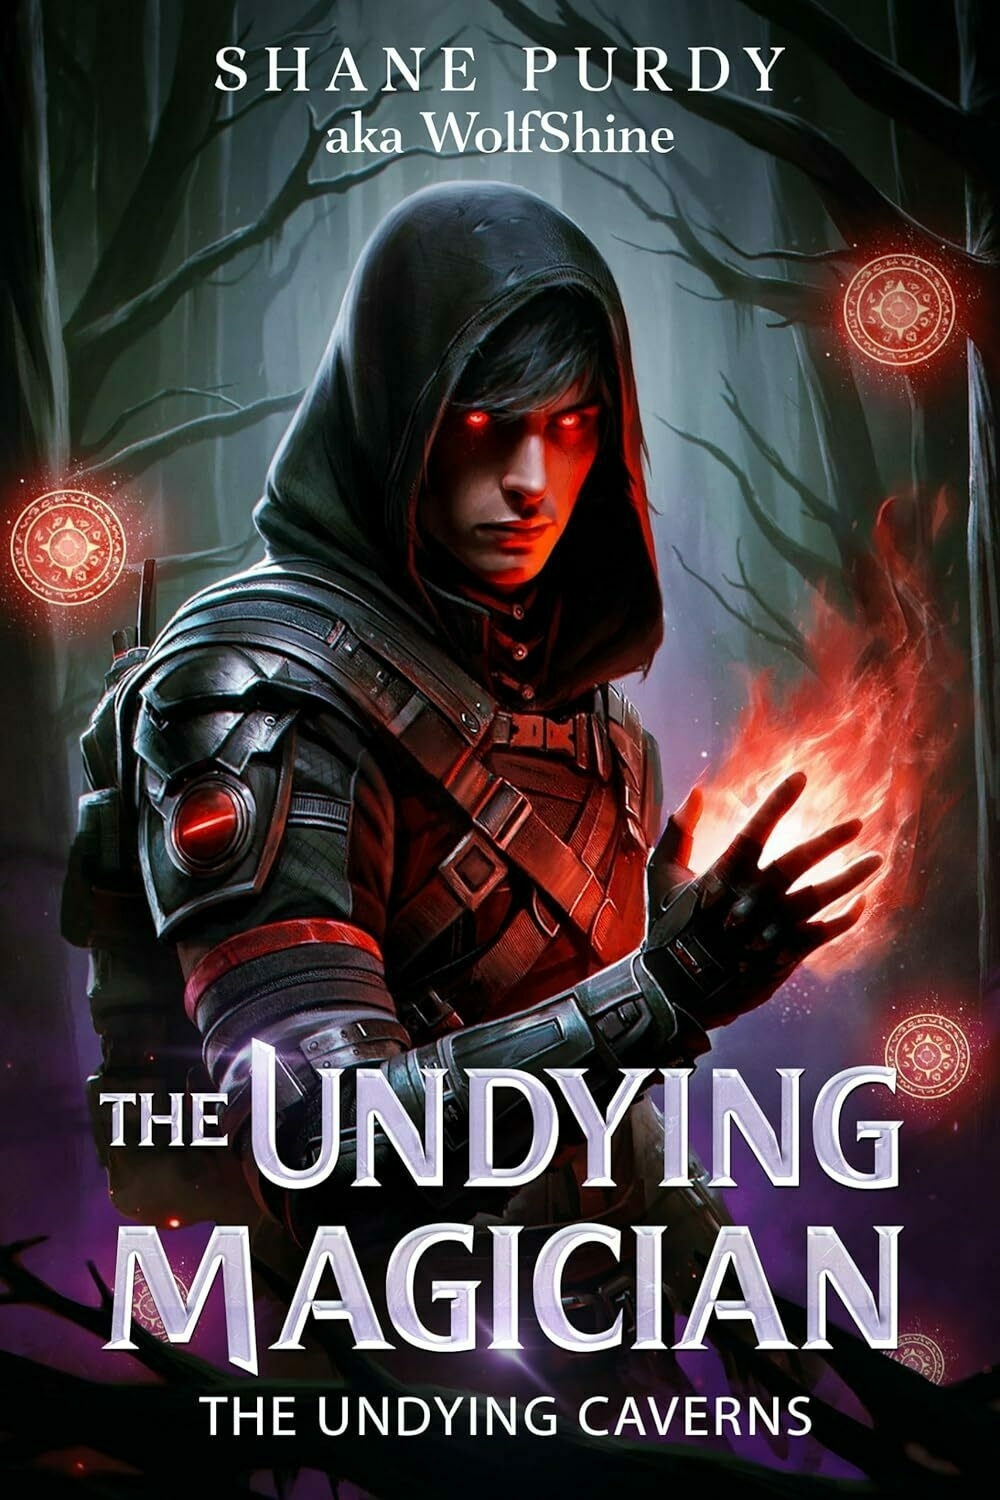 A robed figure with glowing red eyes performs magic in a forest. Text: 'SHANE PURDY aka WolfShine THE UNDYING MAGICIAN THE UNDYING CAVERNS'